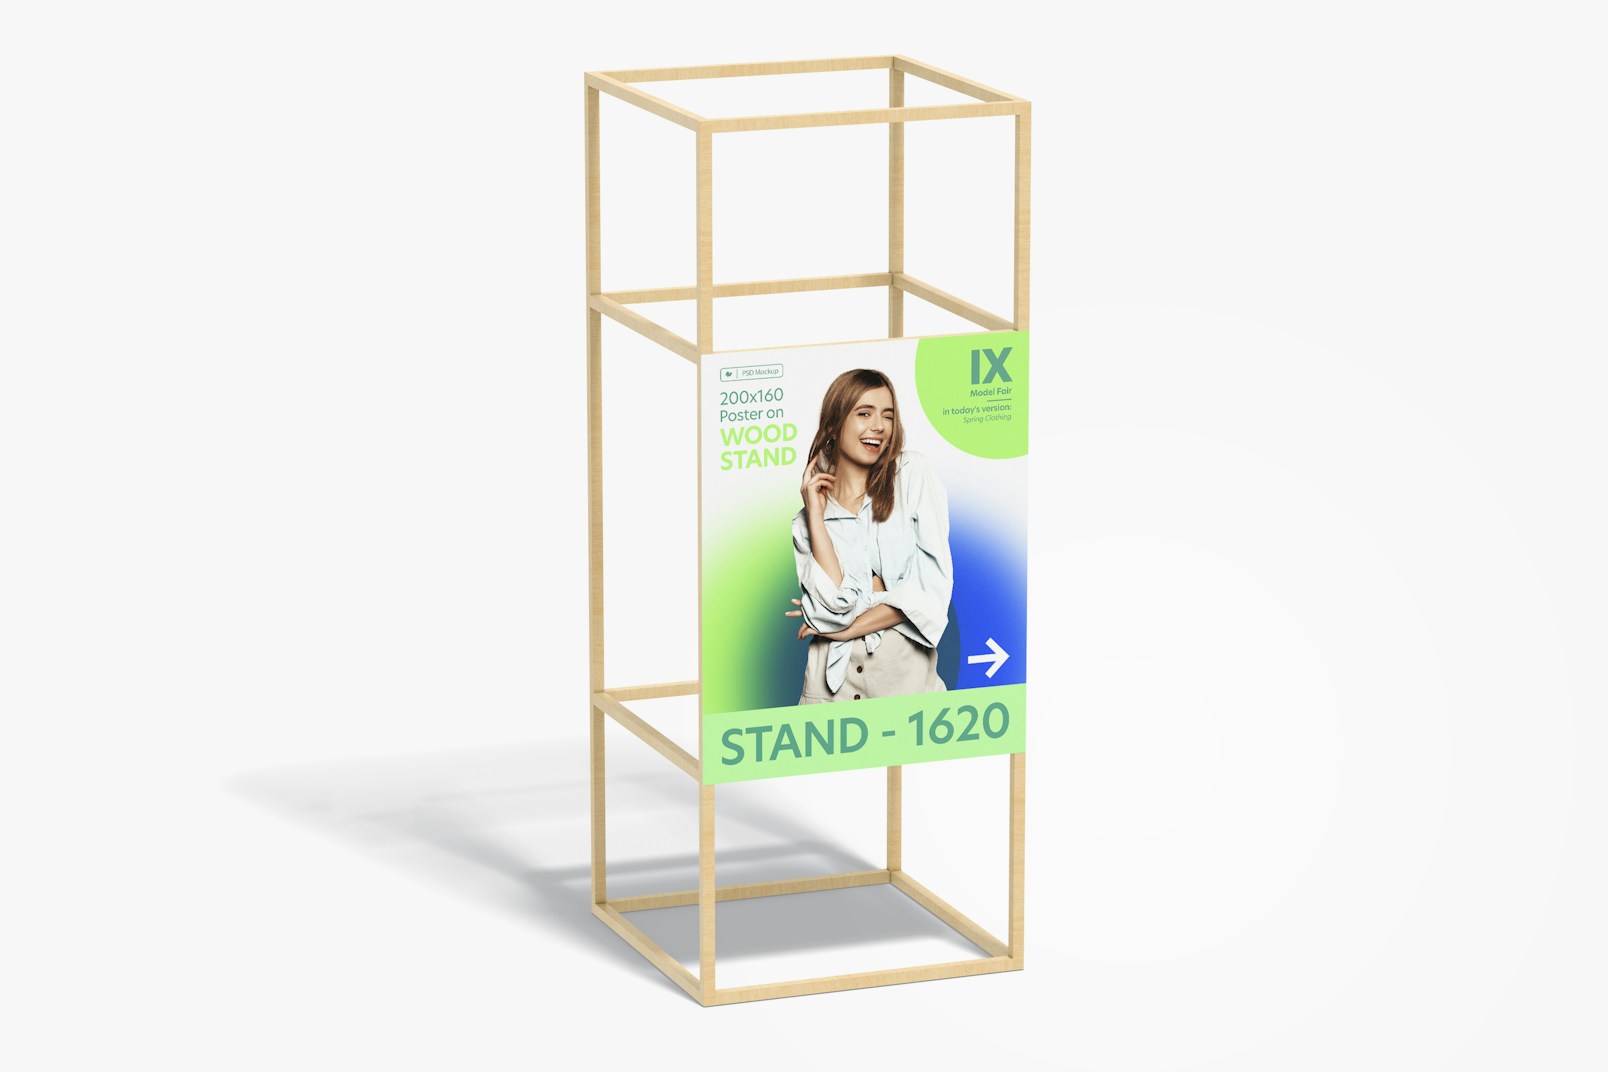 200x160 Poster on Wood Stand Mockup